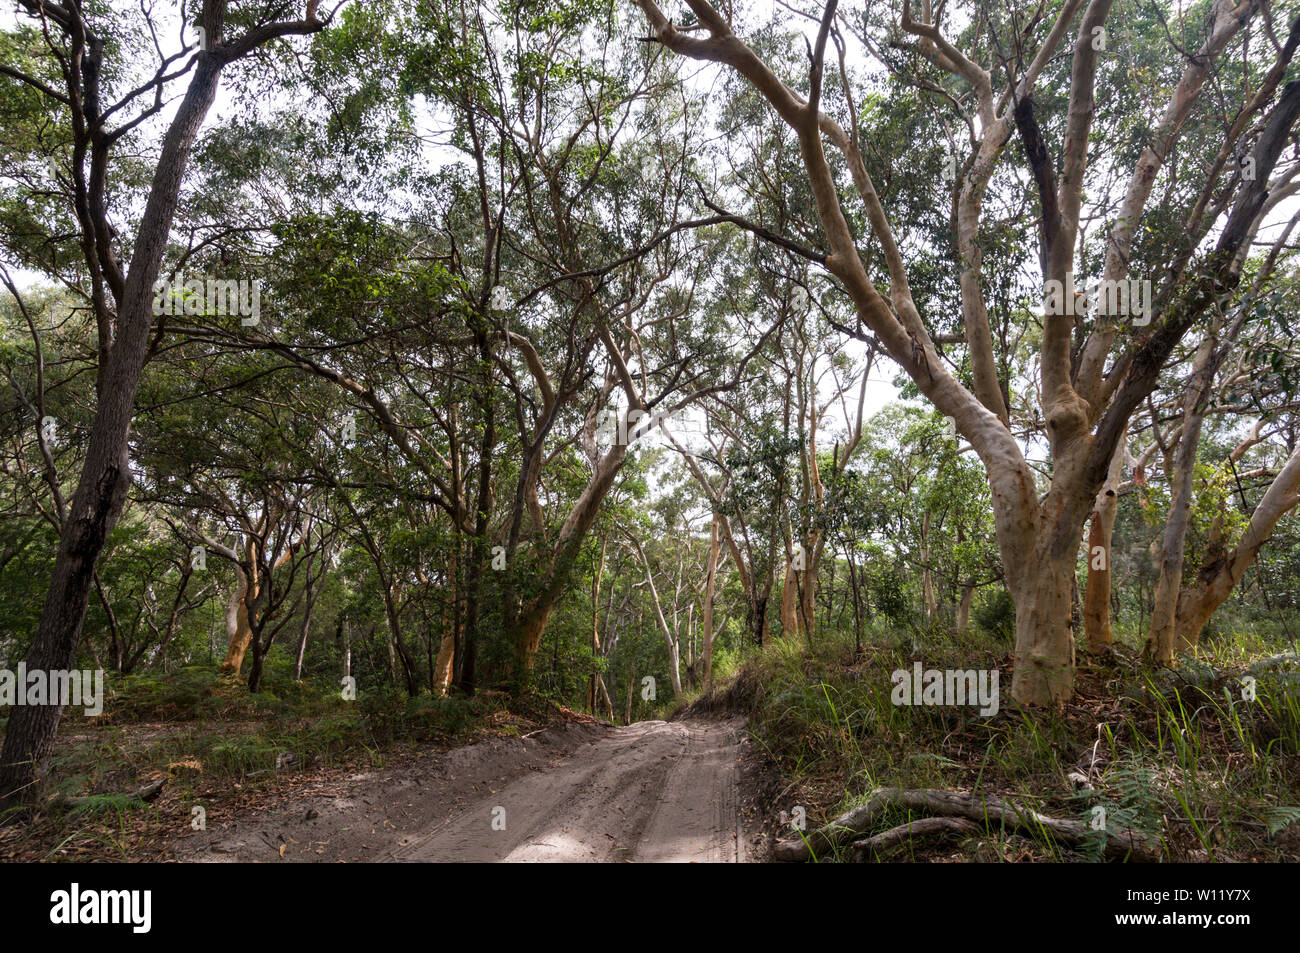 Australian Paperbark trees also called a Melaleuca quinquenervia alongside a vehicle dirt track in the rain forest of Fraser Island in Queensland, Aus Stock Photo